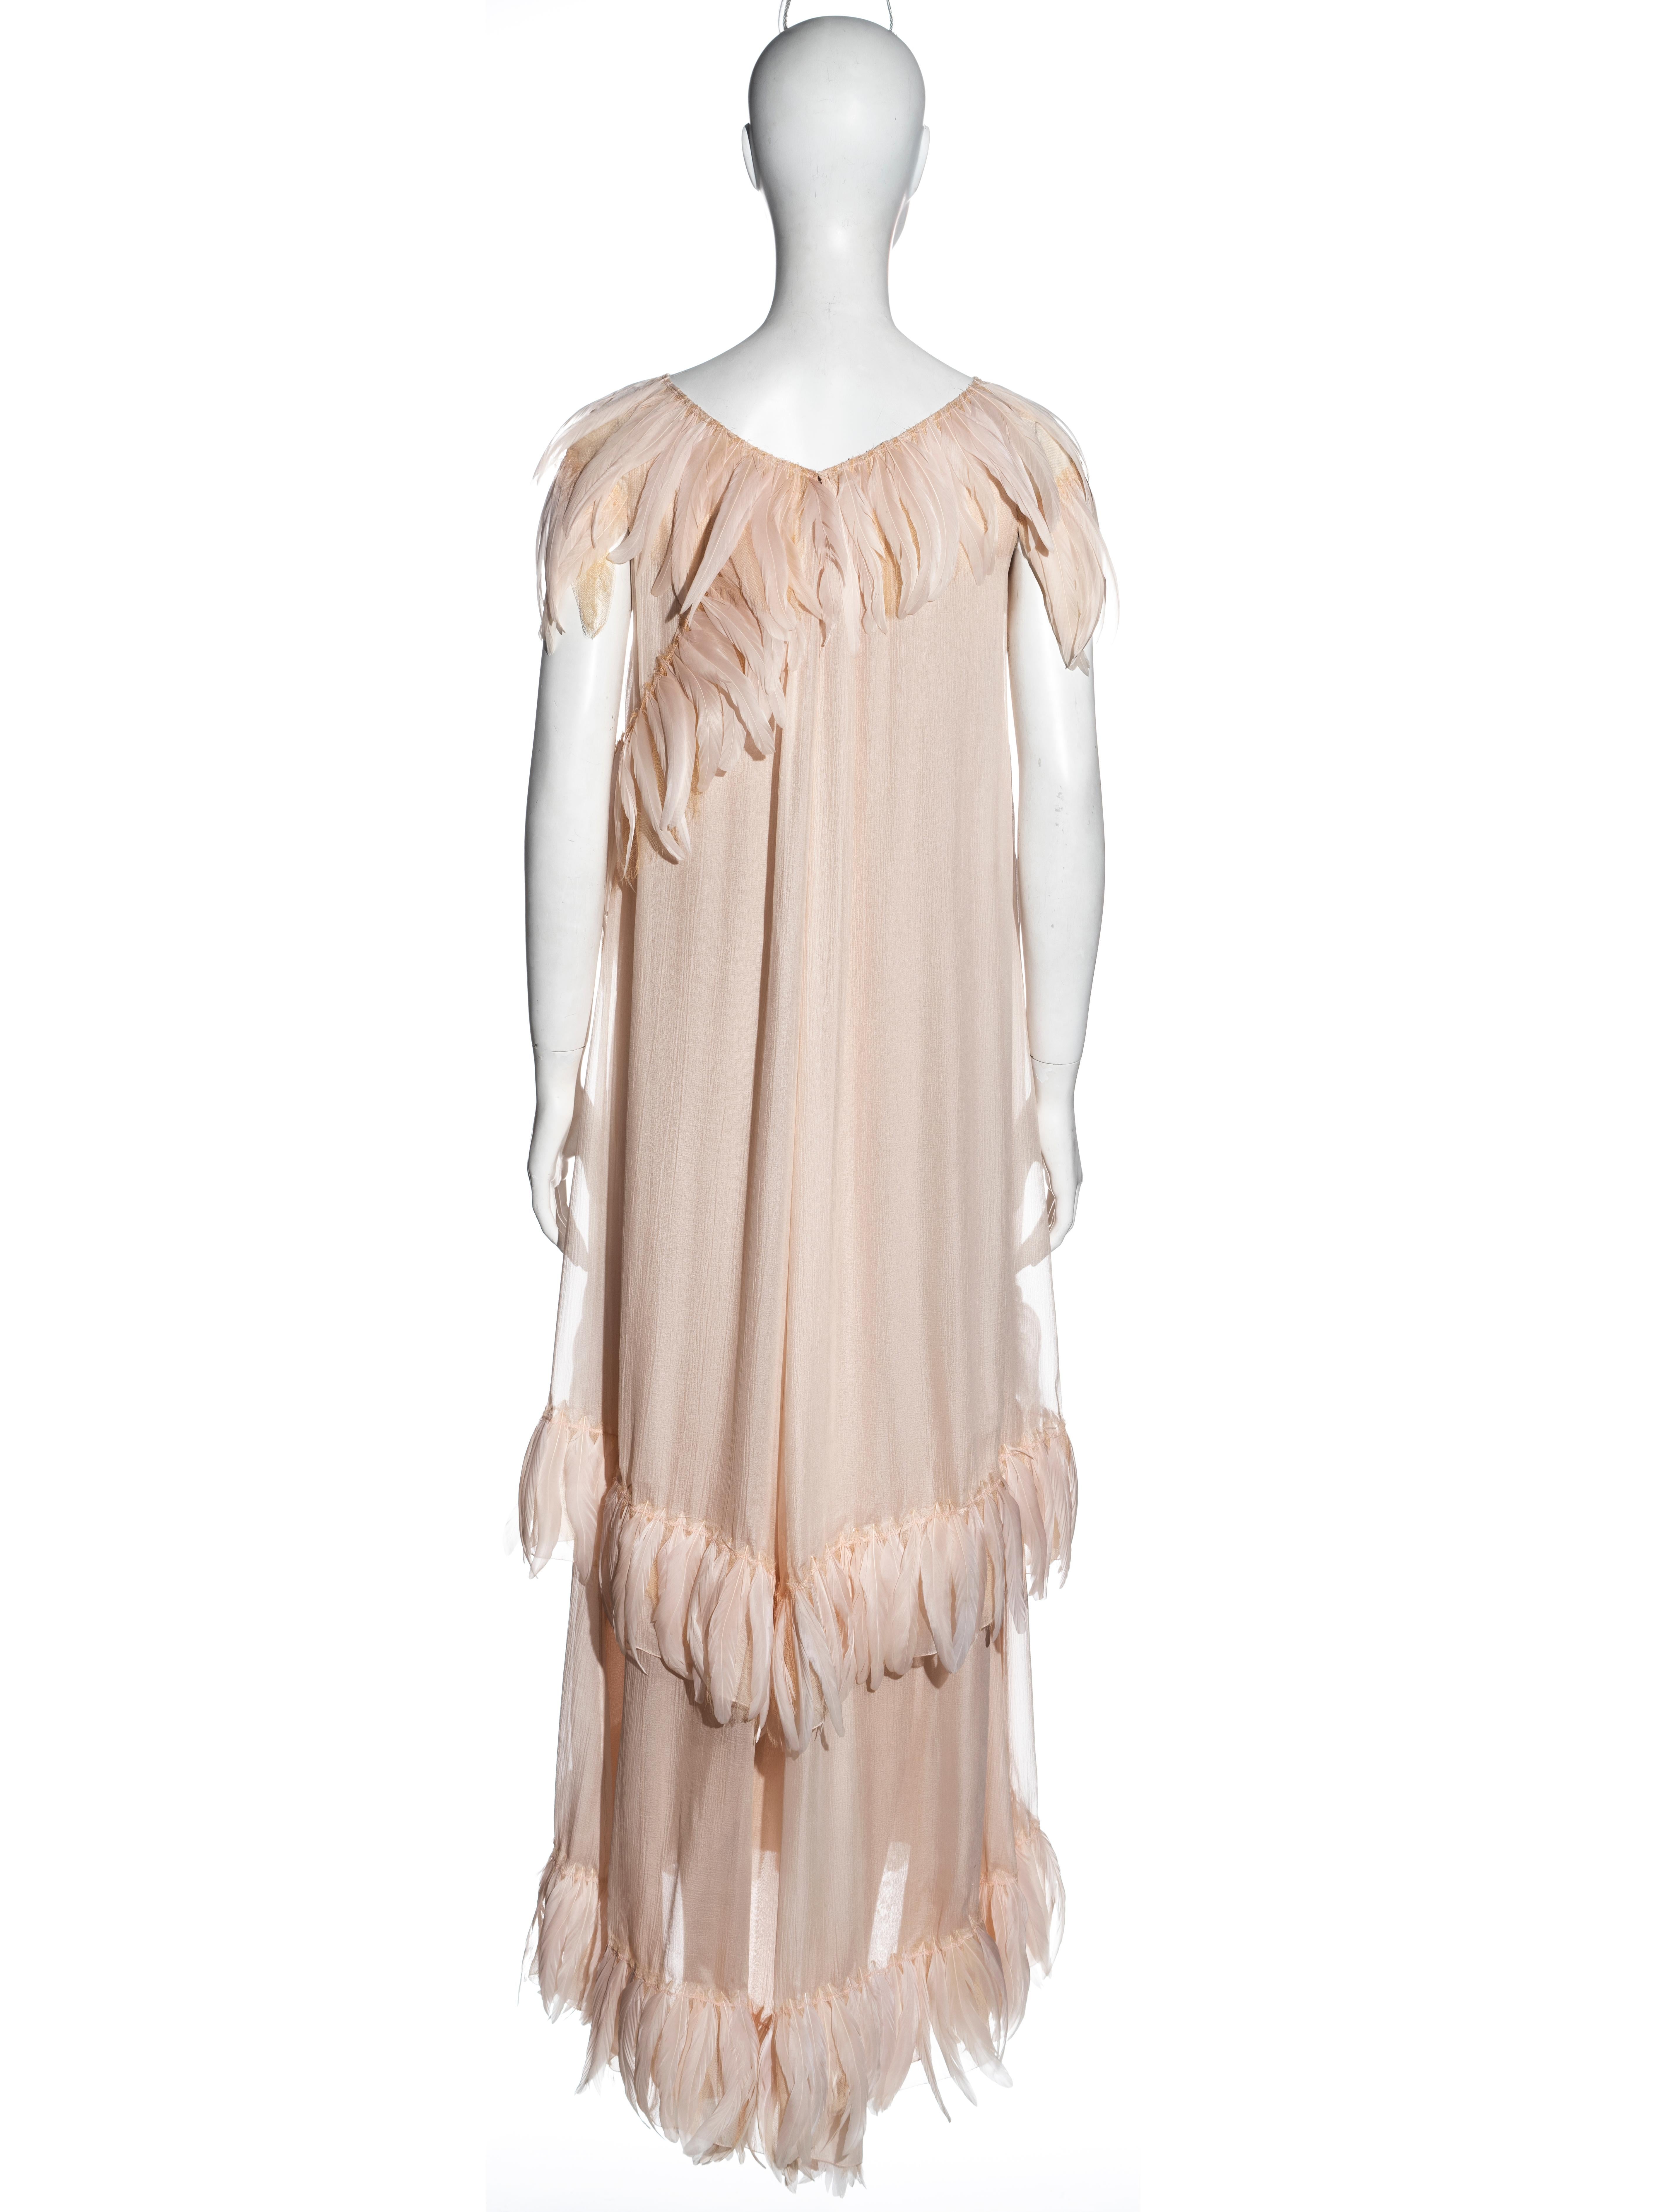 Chanel by Karl Lagerfeld silk chiffon evening dress with feathers, cr 2009 7